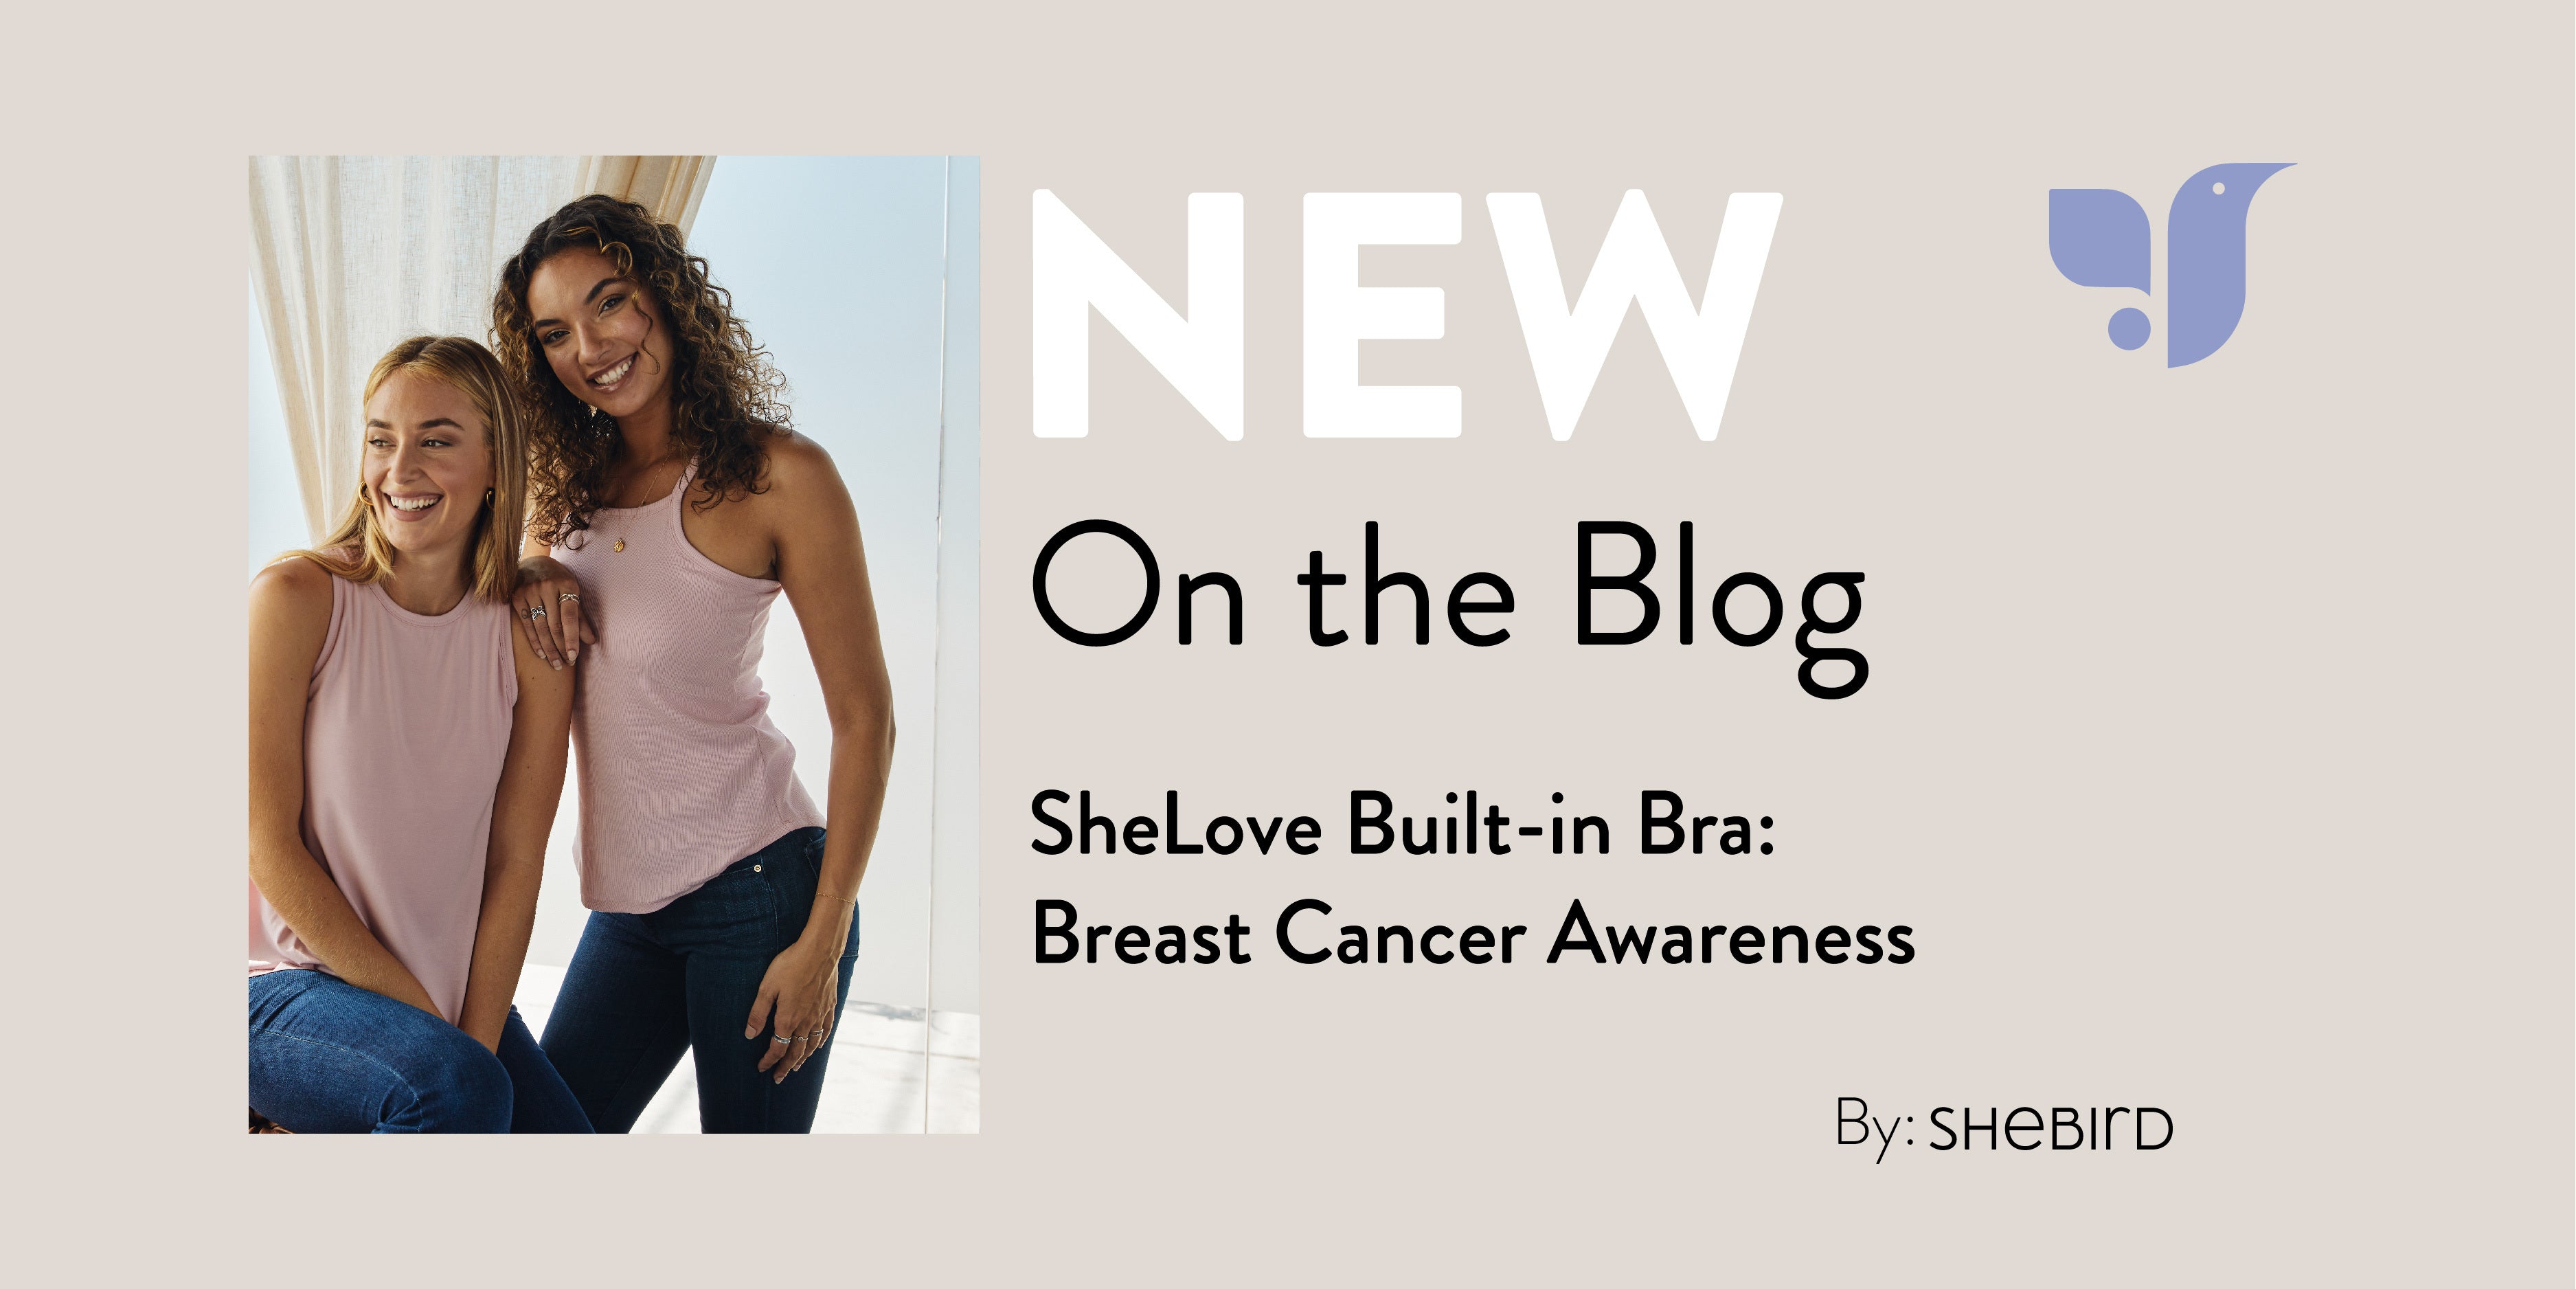 U.P. Bras That Fit provides comfort and confidence for those diagnosed with breast  cancer